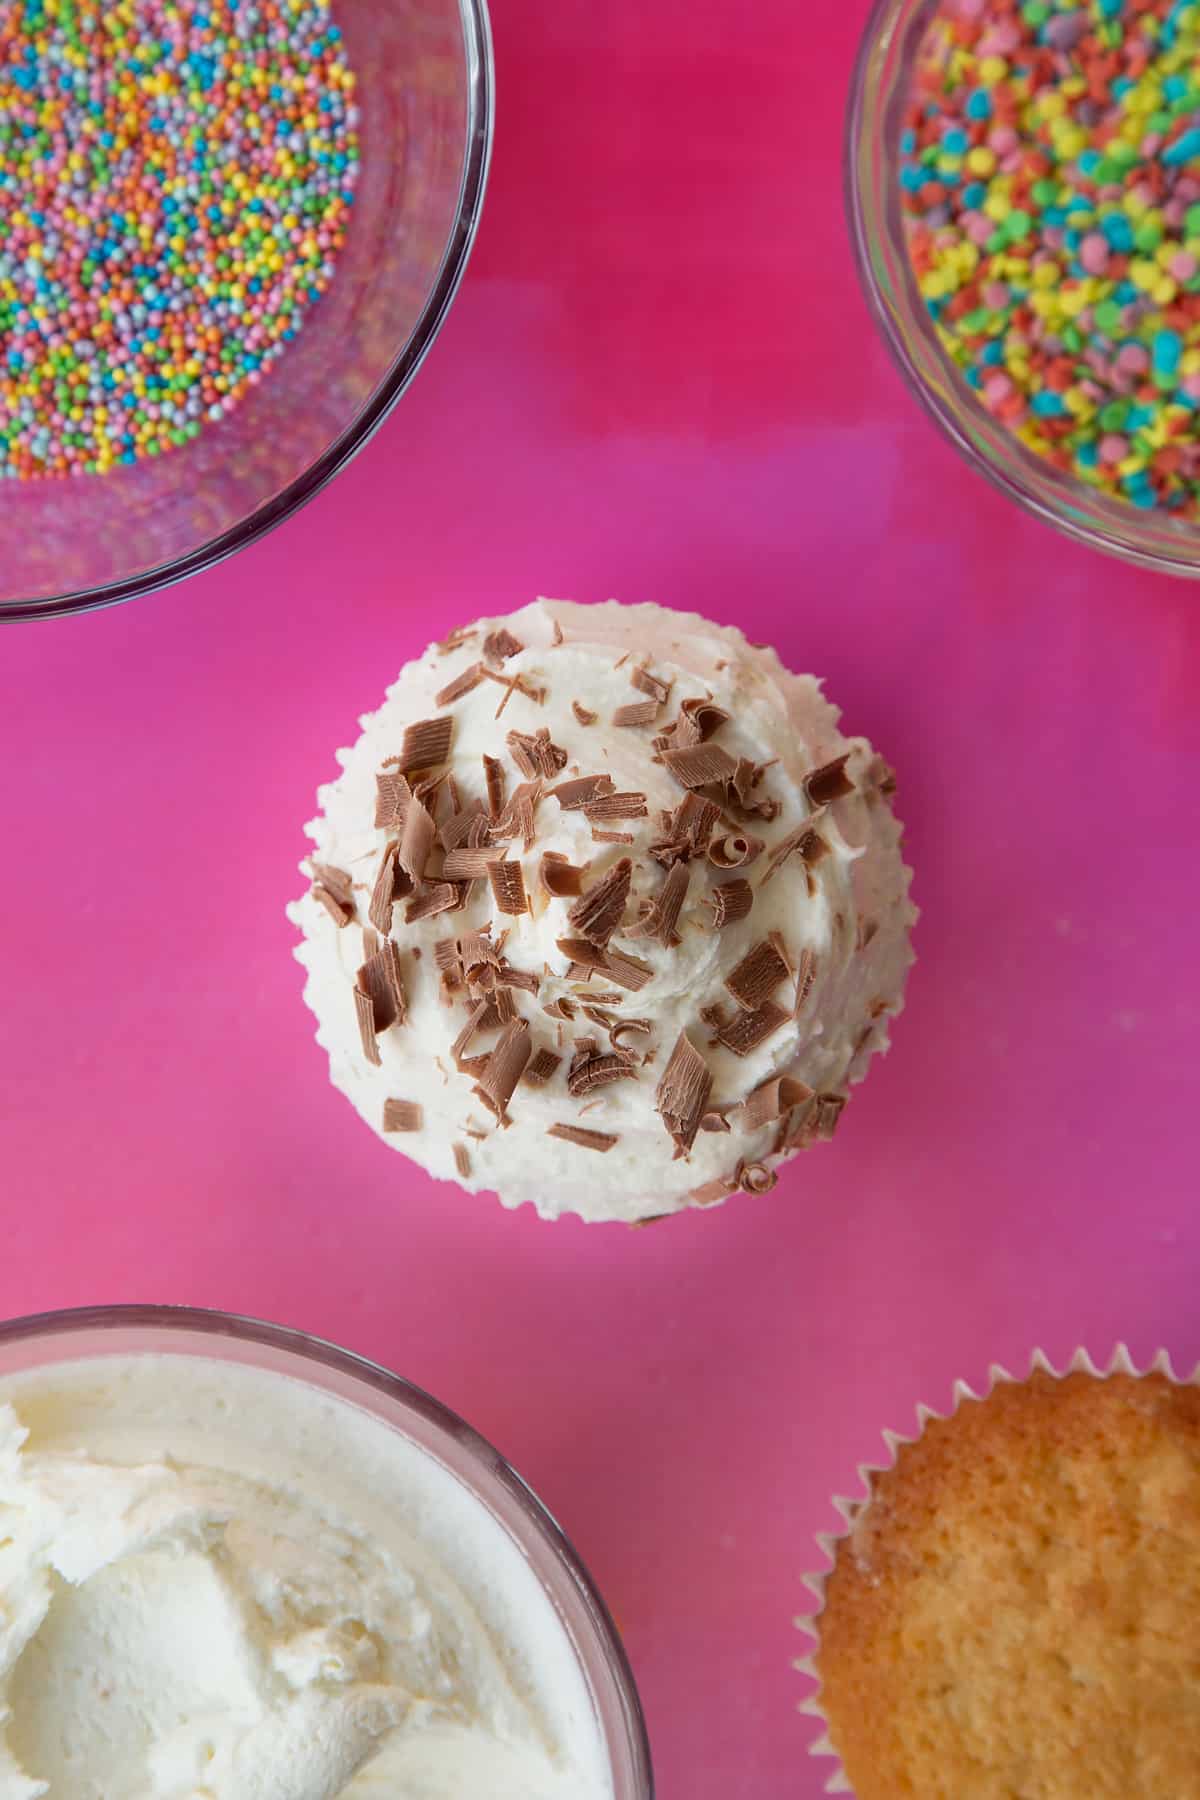 an over head view of a plain sponge cupcake with a swirl of white fosting on topped with chocolate shavings.